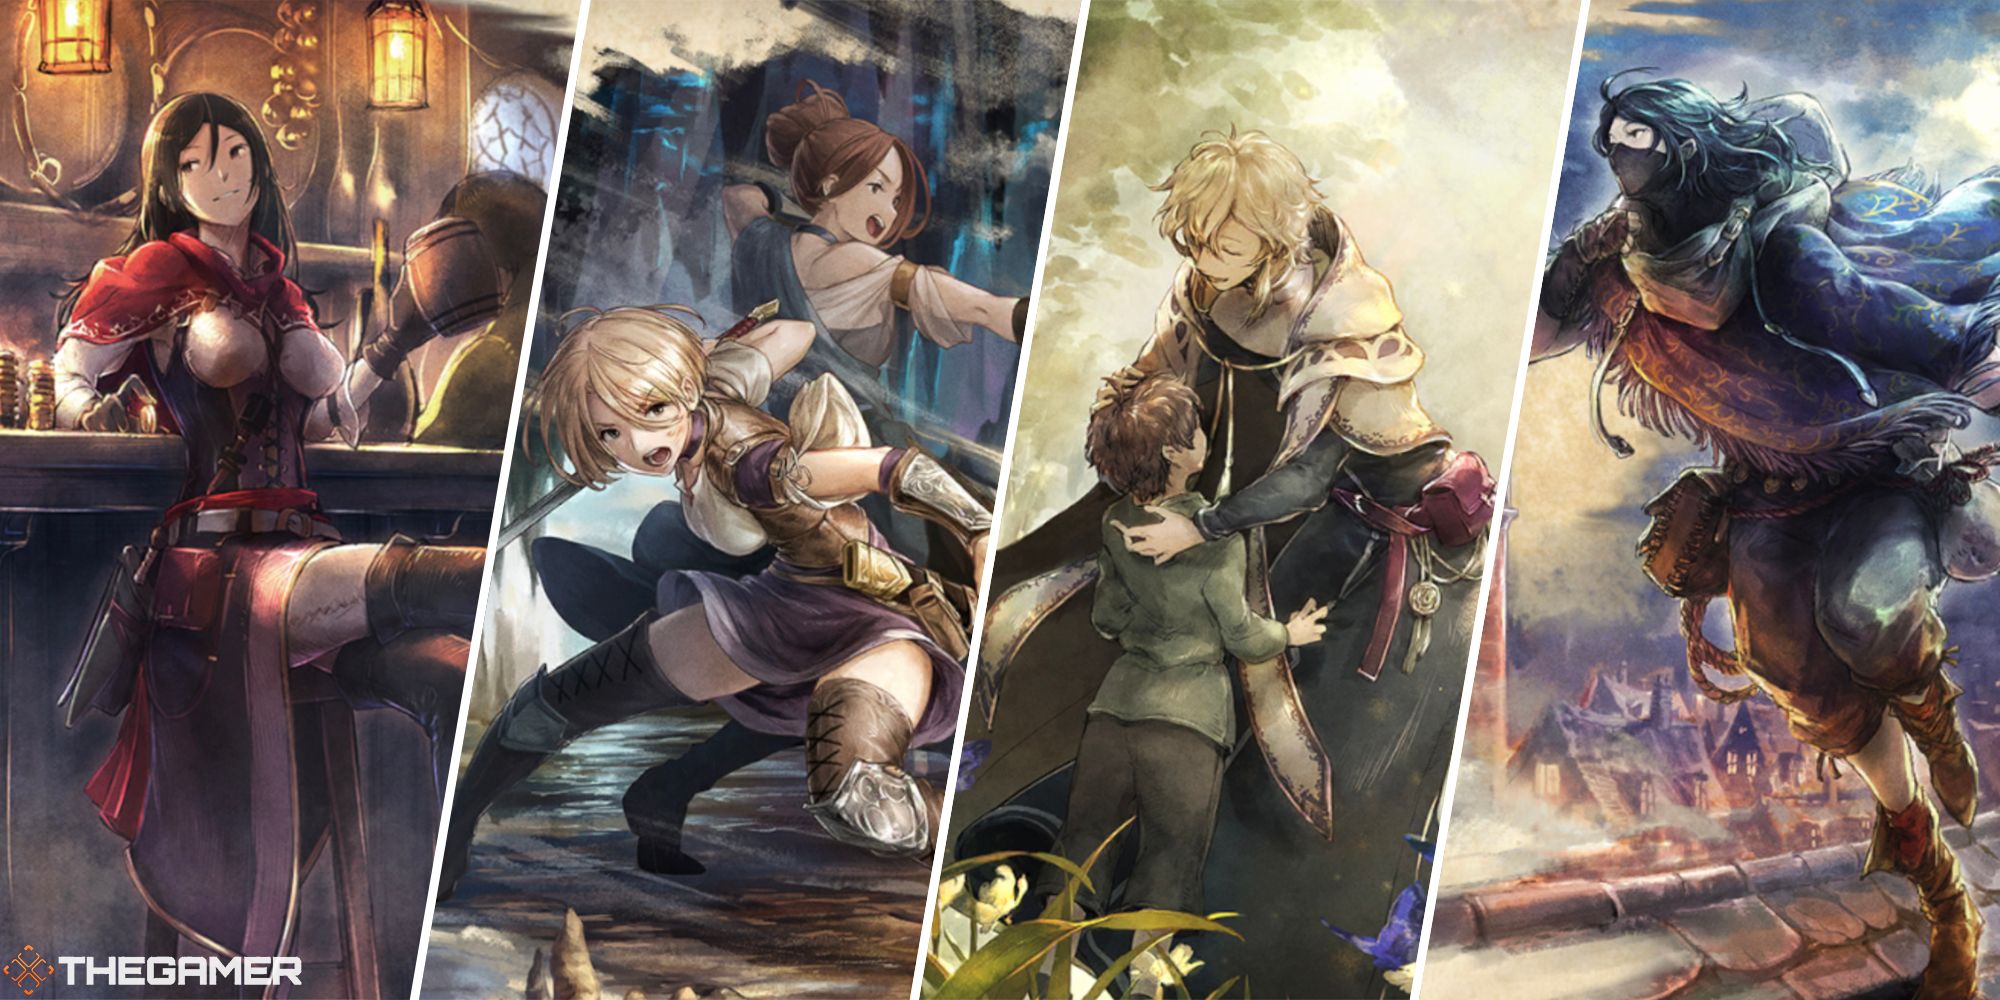 Aslyte Art - Octopath Traveler: Champions of the Continent Art Gallery